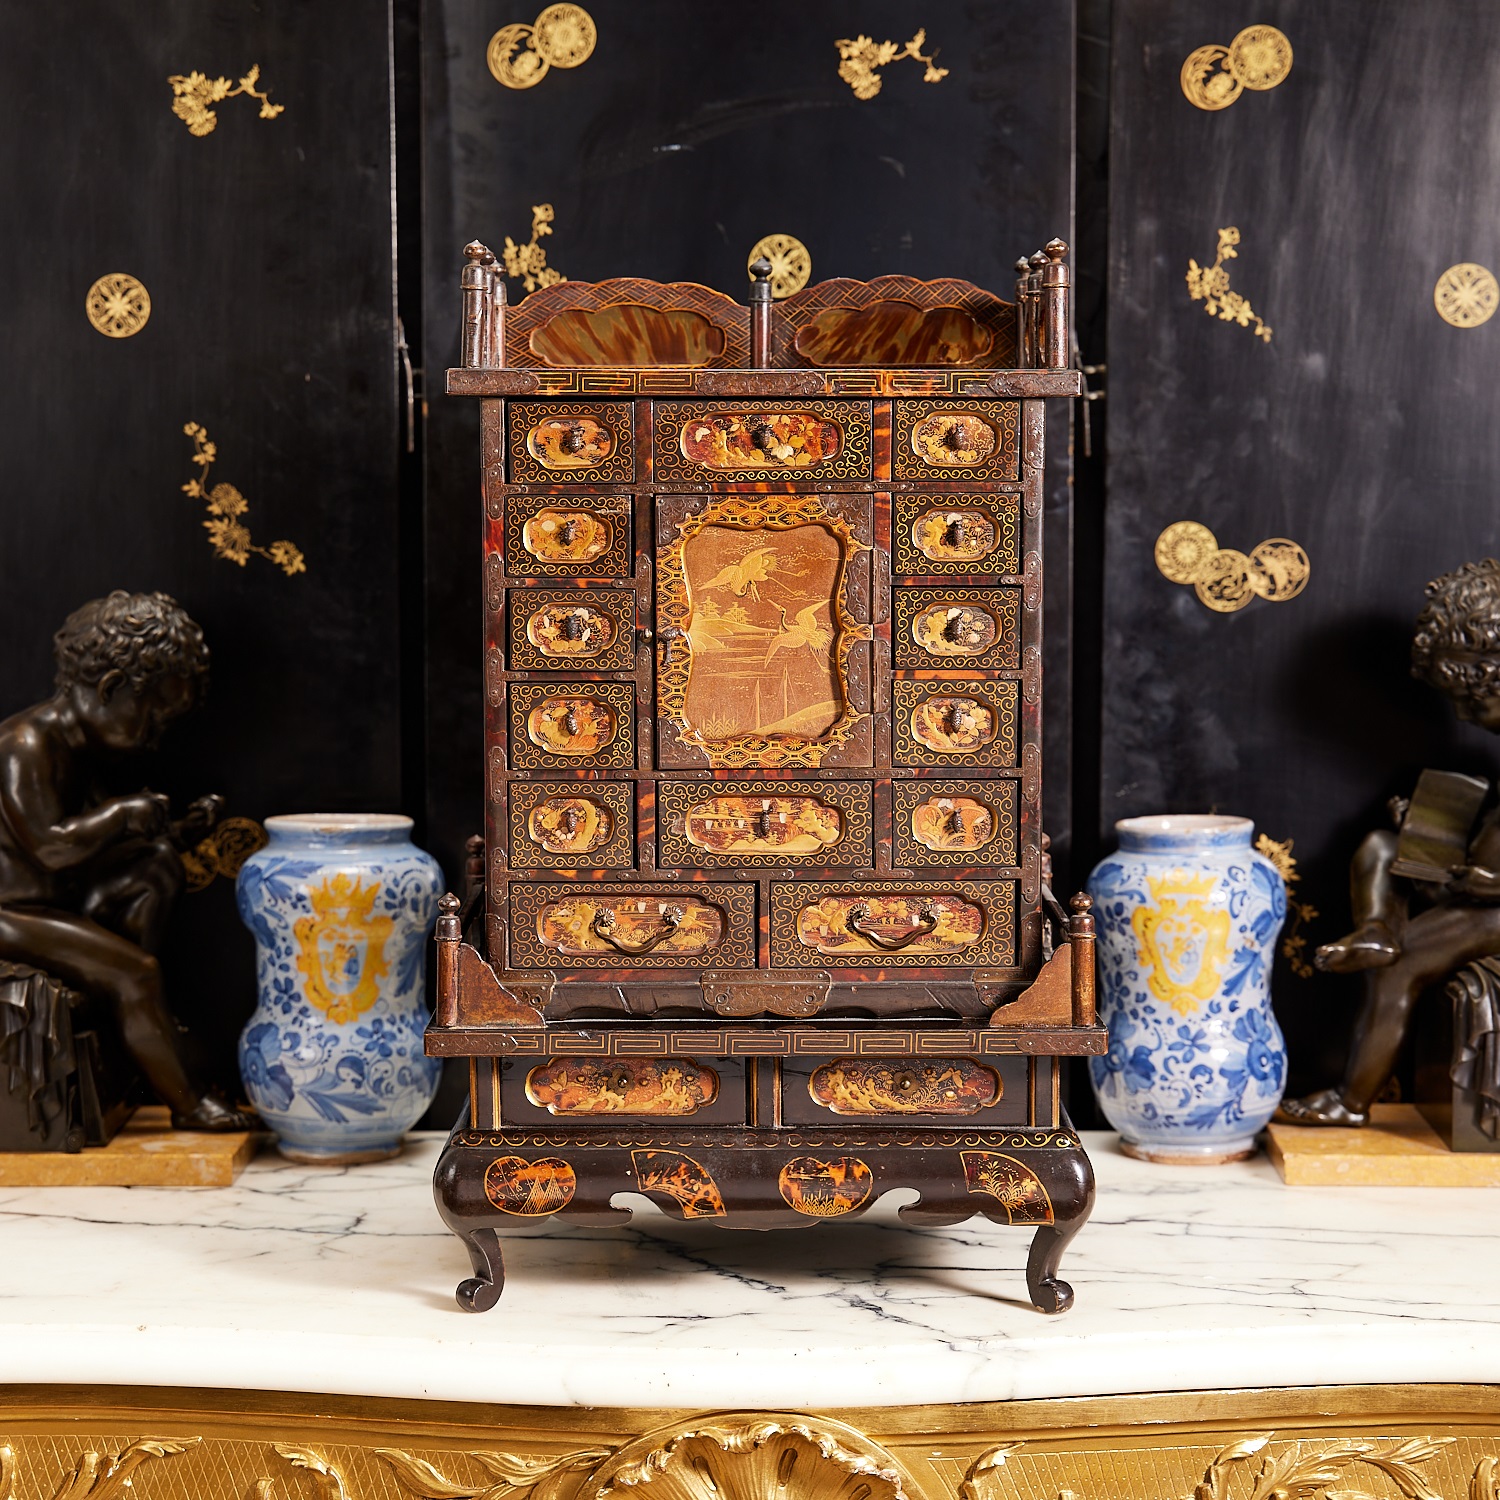 A FINE LATE 19TH CENTURY JAPANESE TORTOISESHELL, LACQUER AND GOLD TABLE CABINET